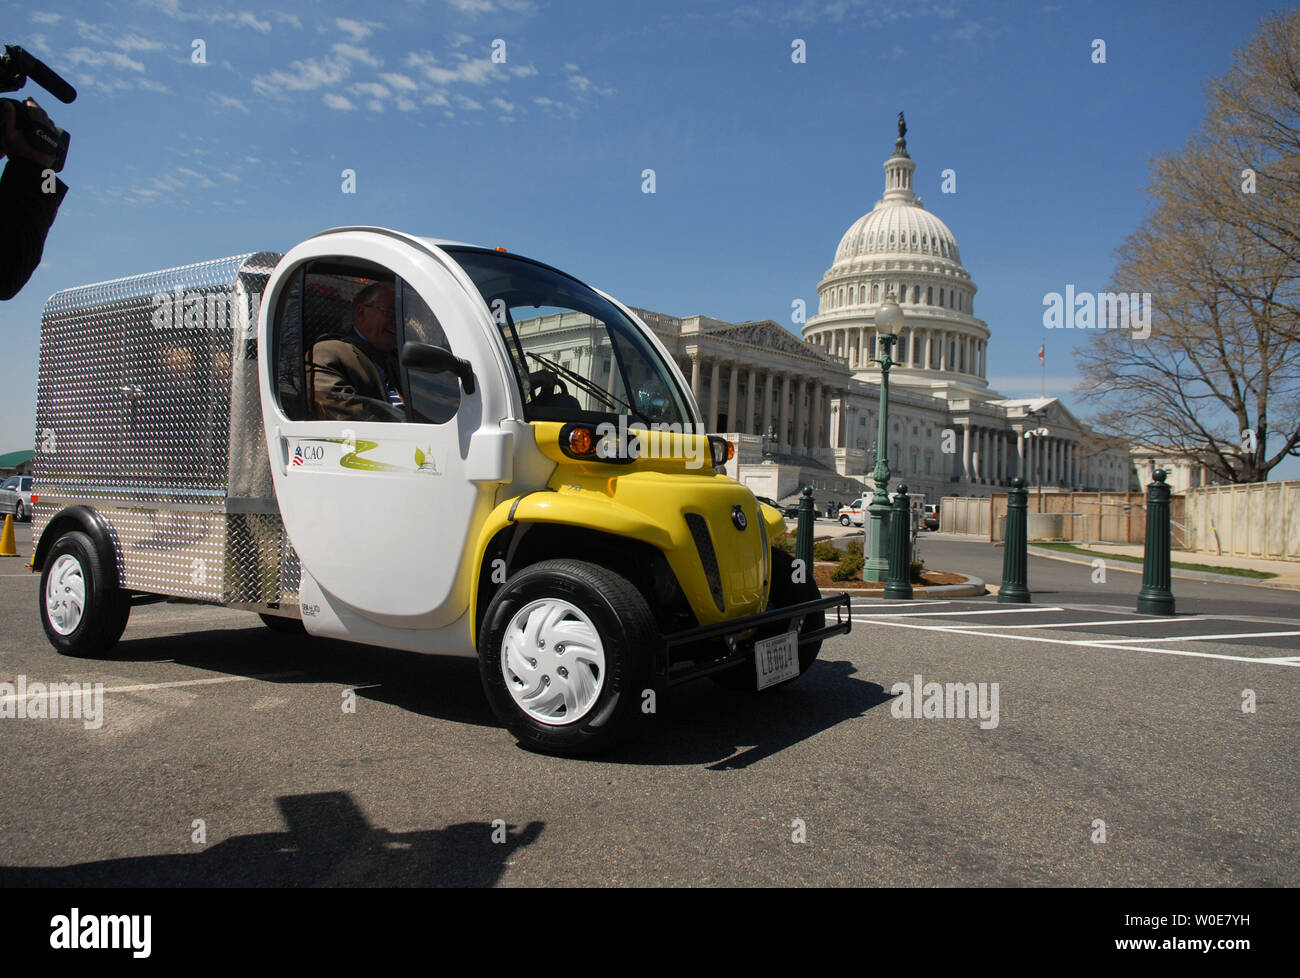 The Global Electric Motorcars (GEM) eL XD electric car is seen on display  on the grounds of the U.S. Capitol in Washington on April 2, 2008. The el  XD features a 7.0